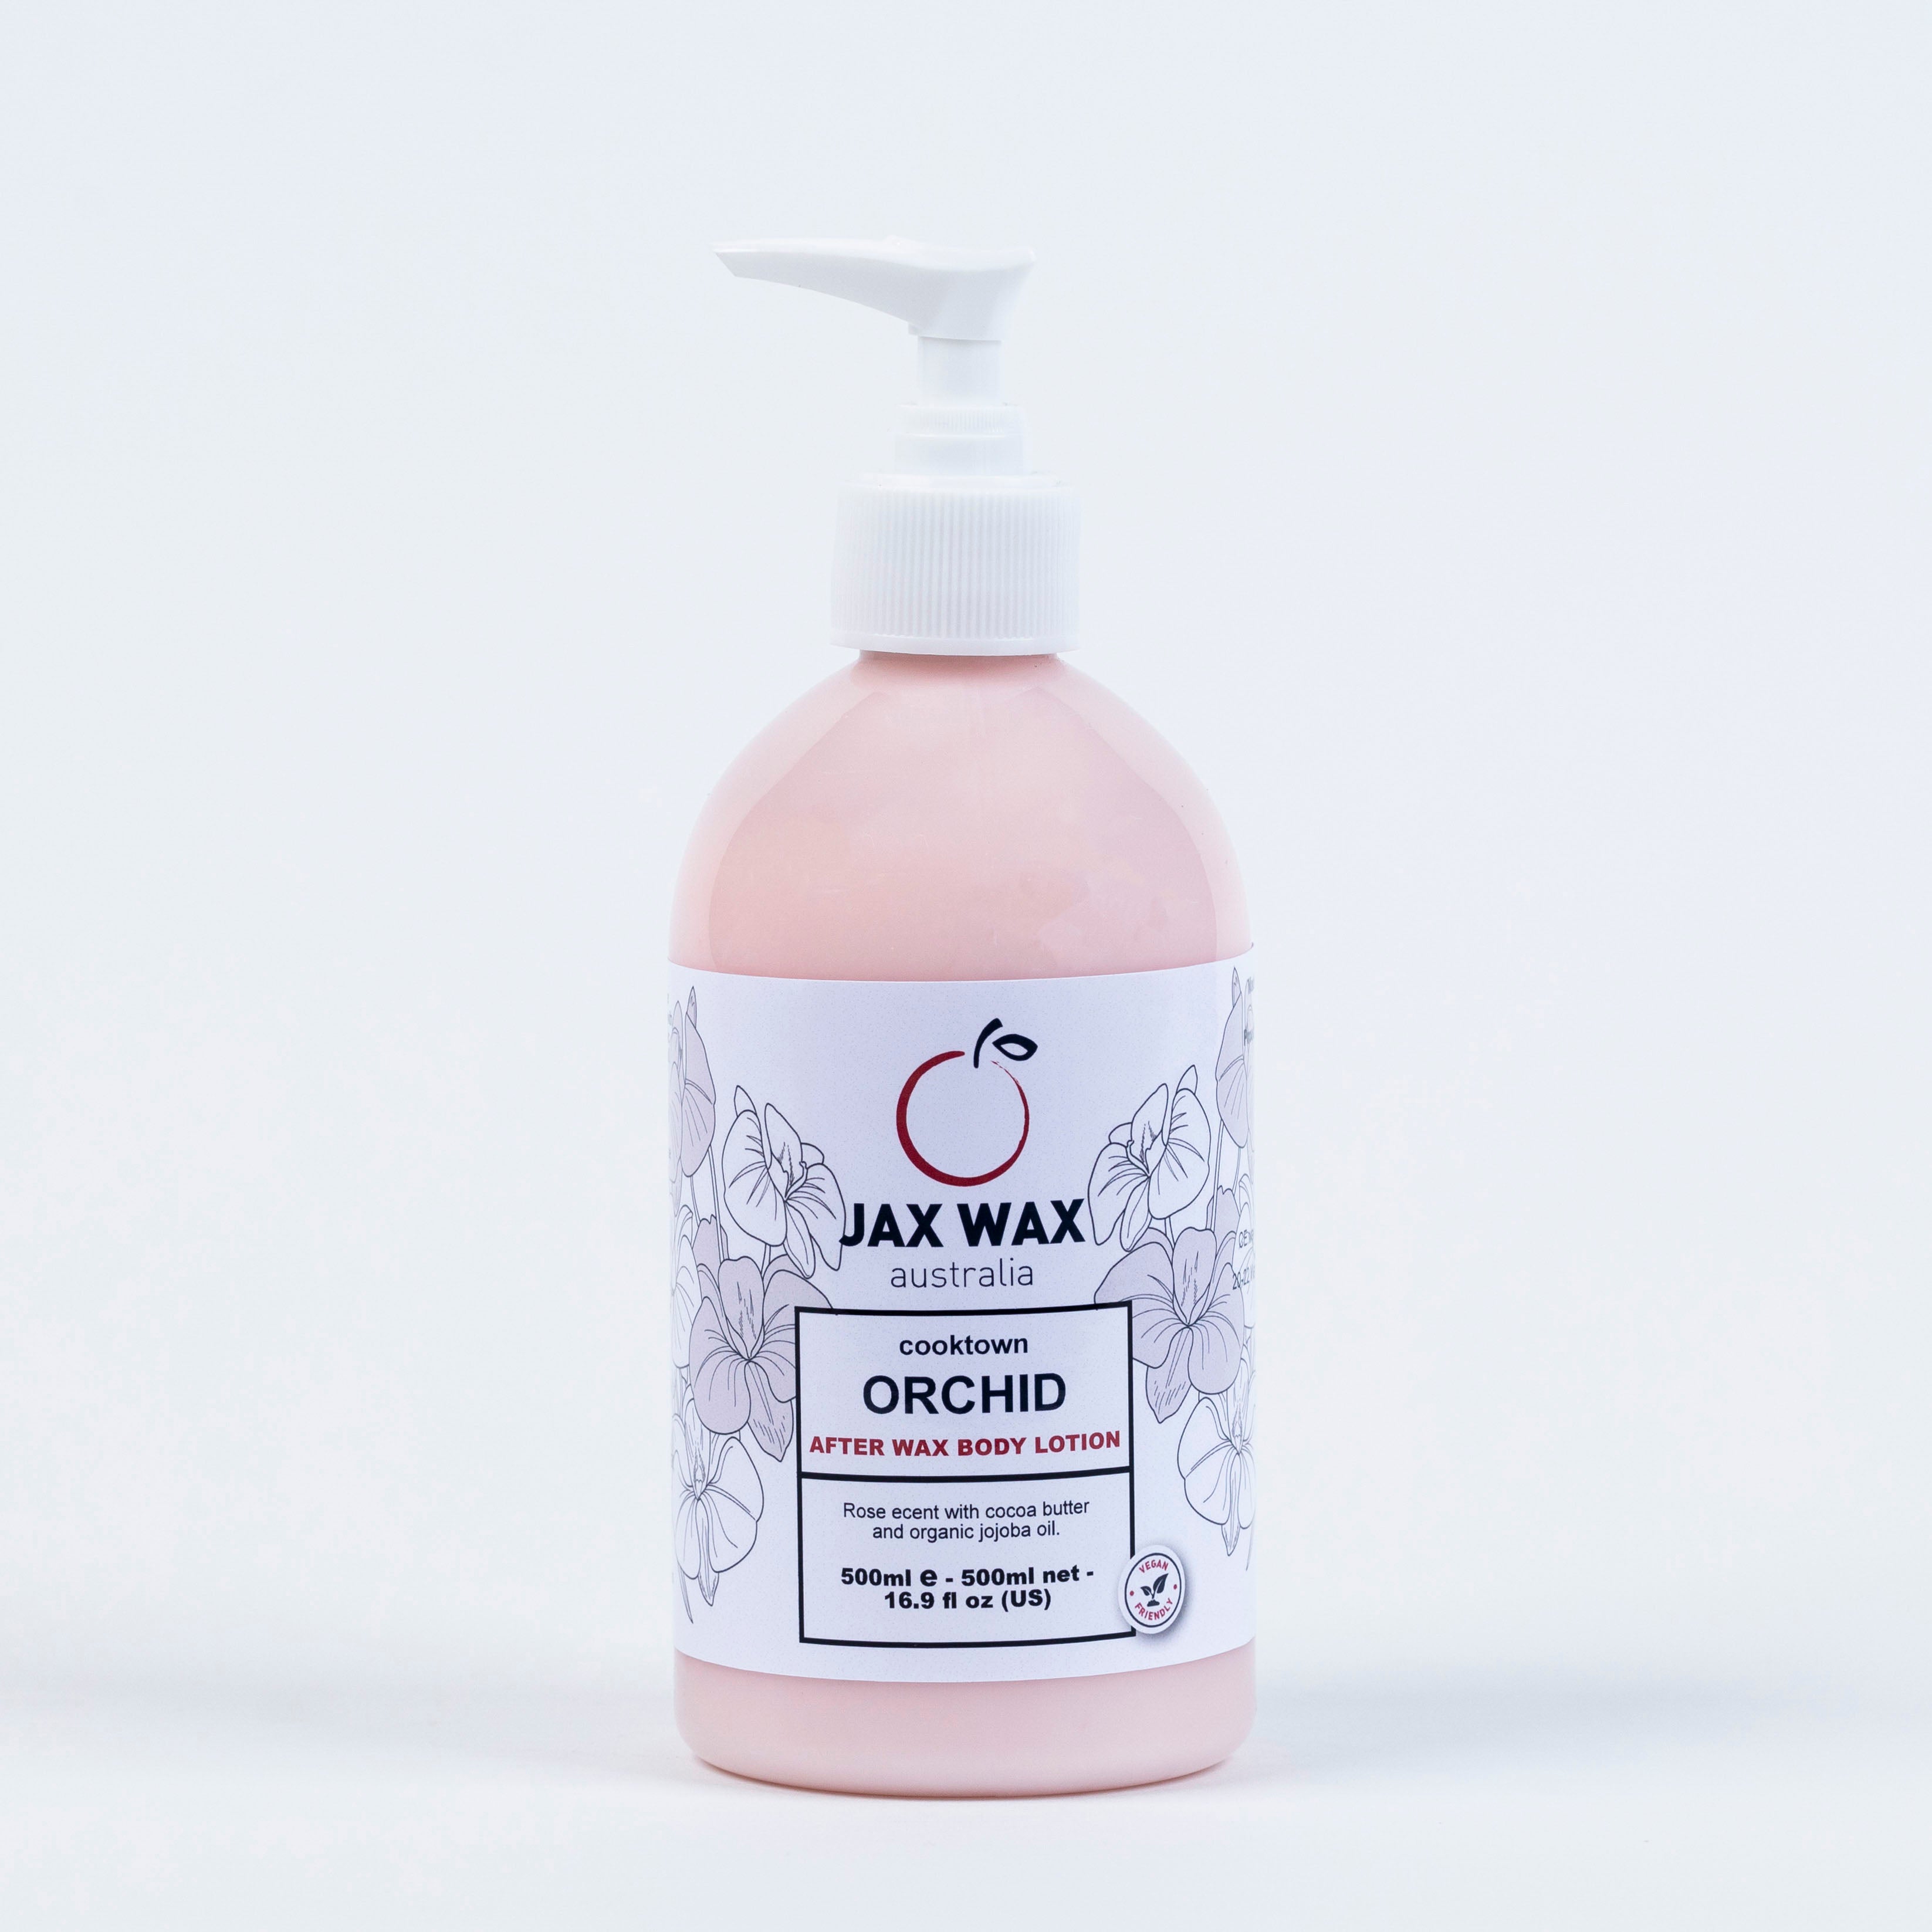 Jax Wax Cooktown Orchid After Wax Body Lotion 500ml